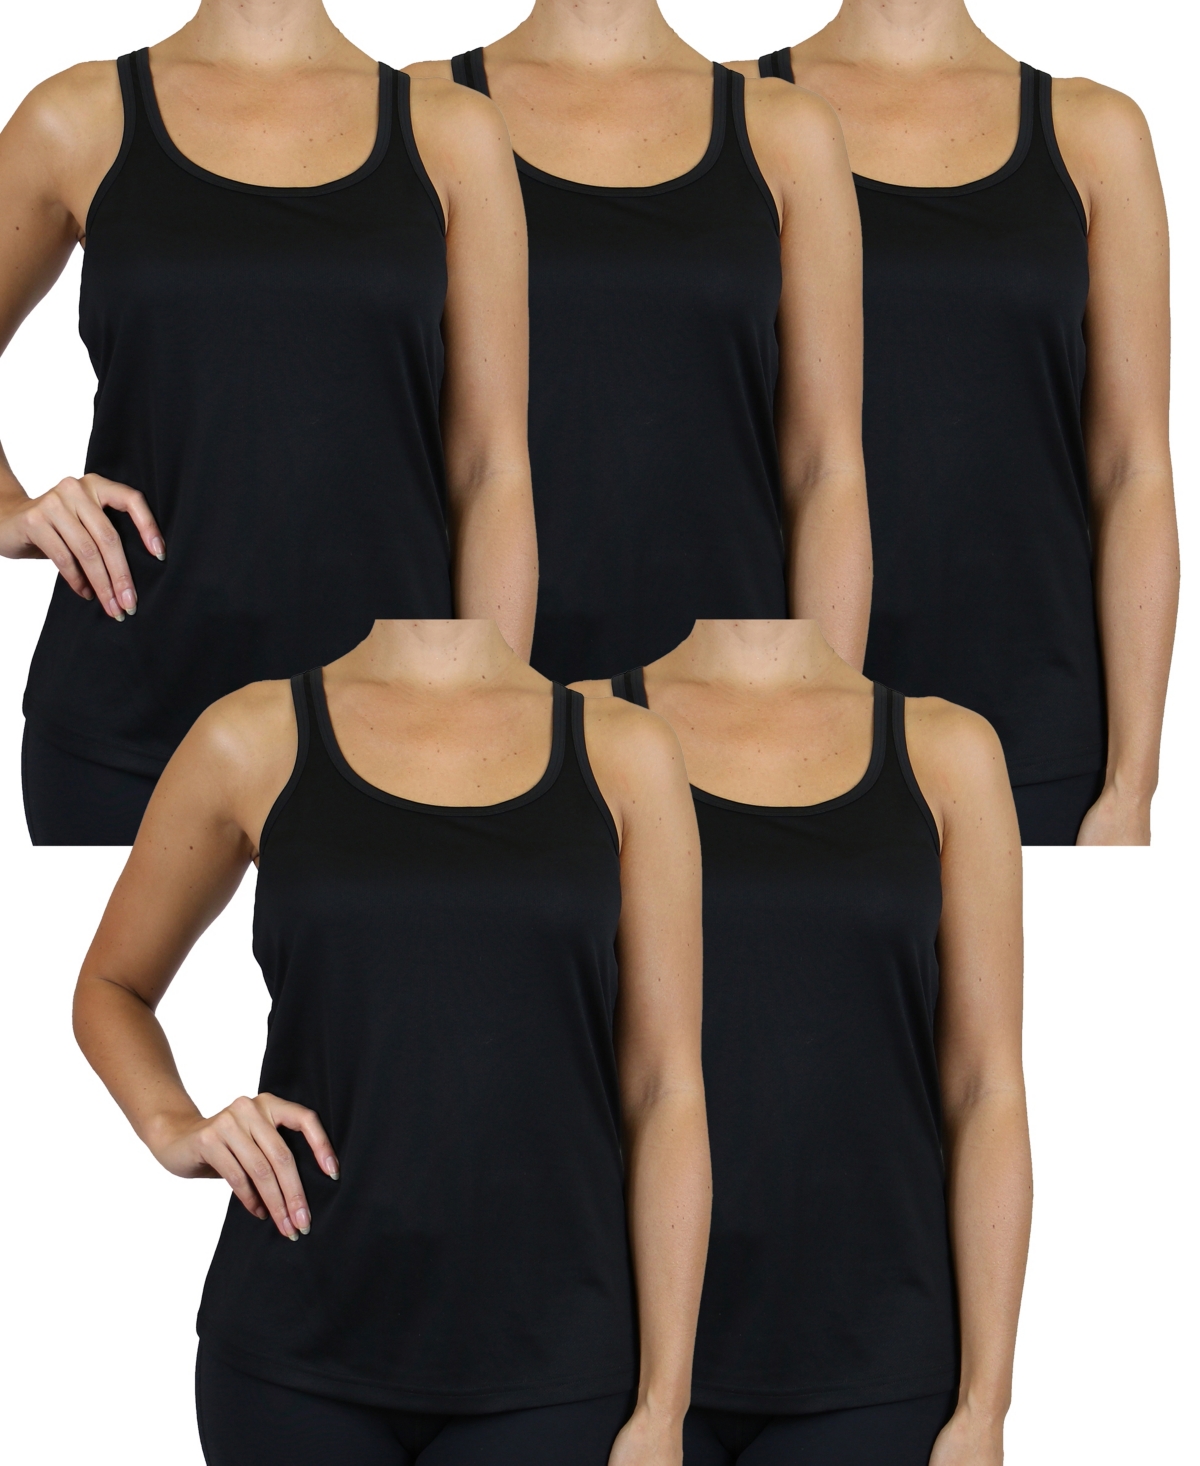 Galaxy By Harvic Women's Moisture Wicking Racerback Tanks-5 Pack In Black